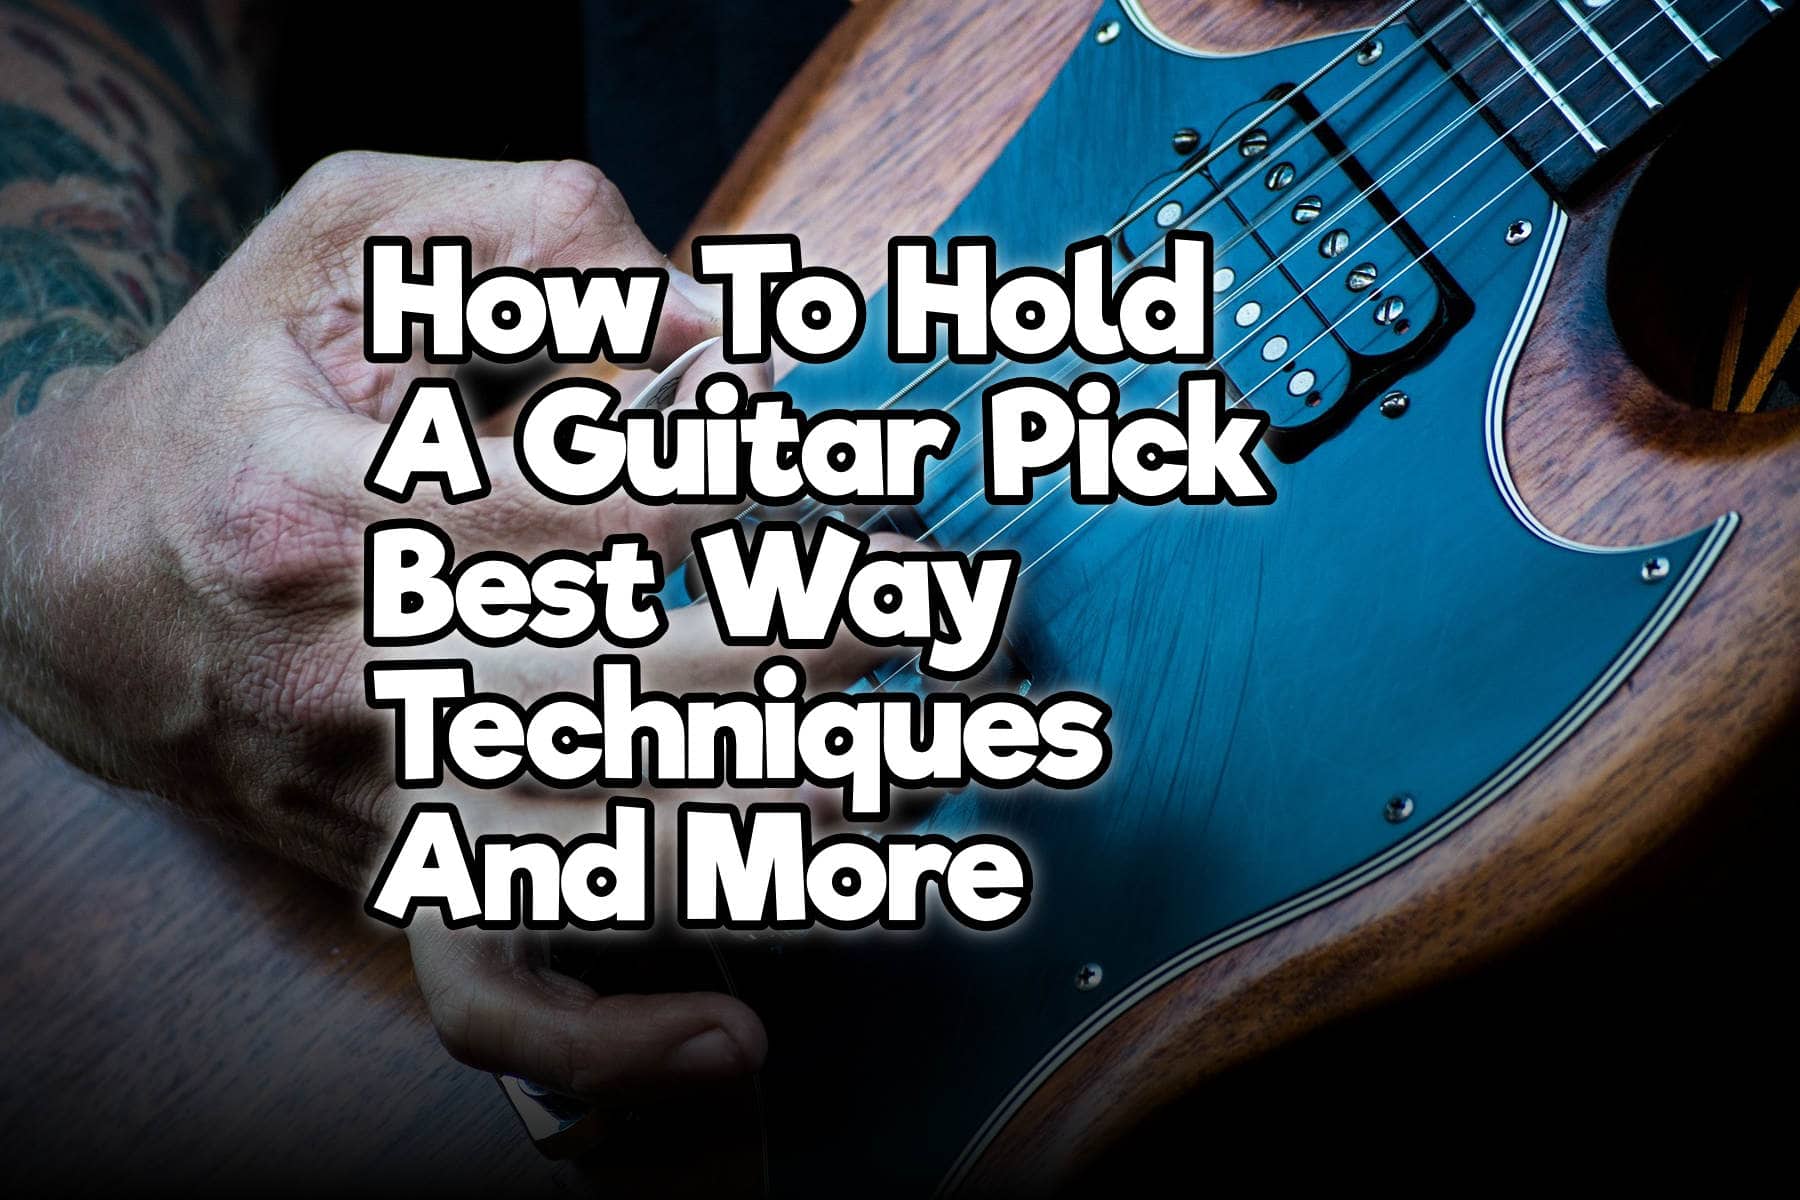 How To Hold A Guitar Pick Best Way Techniques And More Rock Guitar Universe